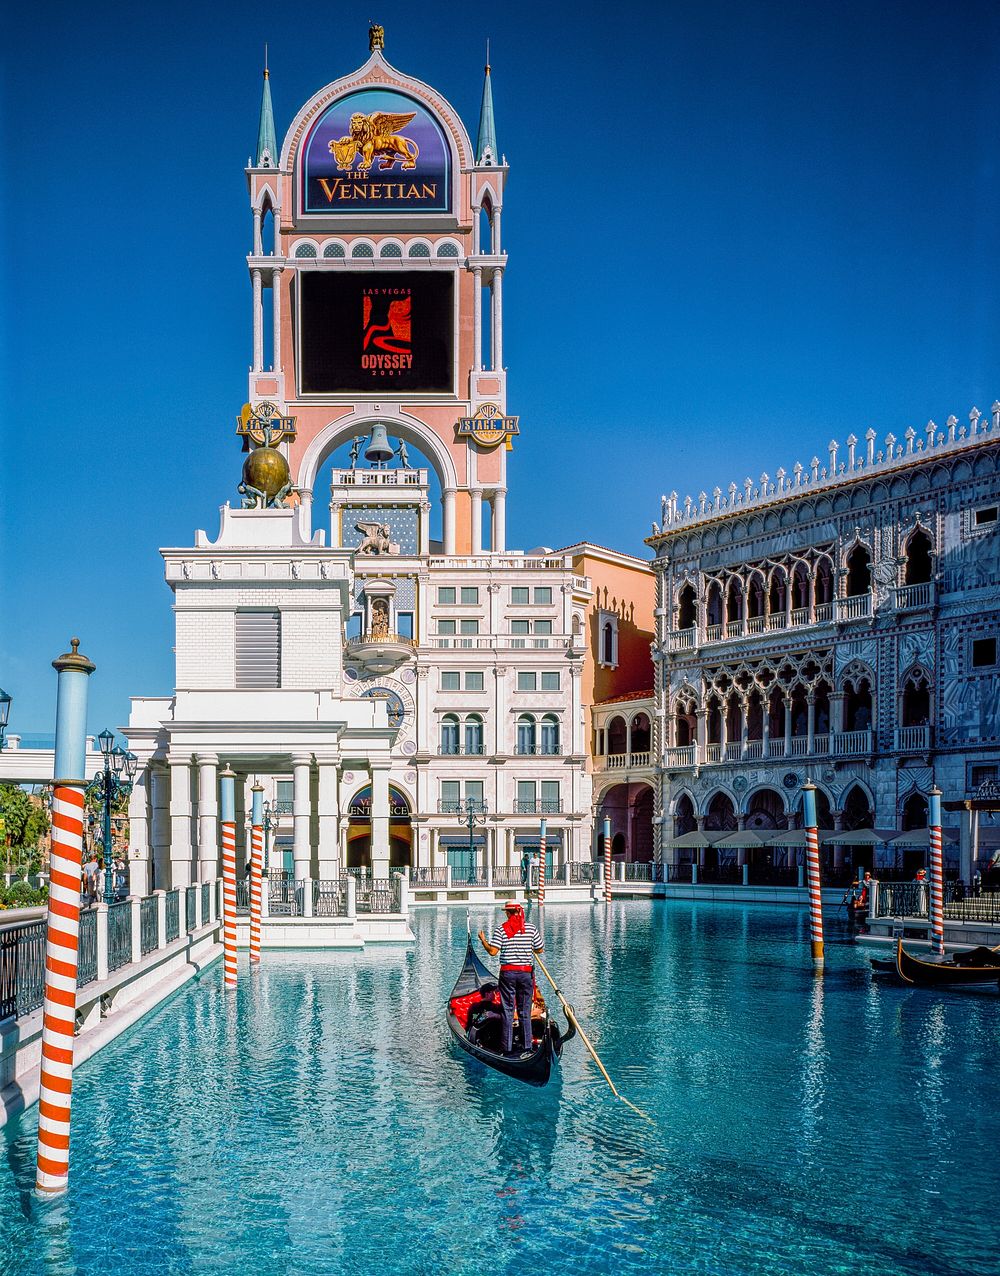 Venetian Casino Hotel in Las Vegas. Original image from Carol M. Highsmith&rsquo;s America, Library of Congress collection.…